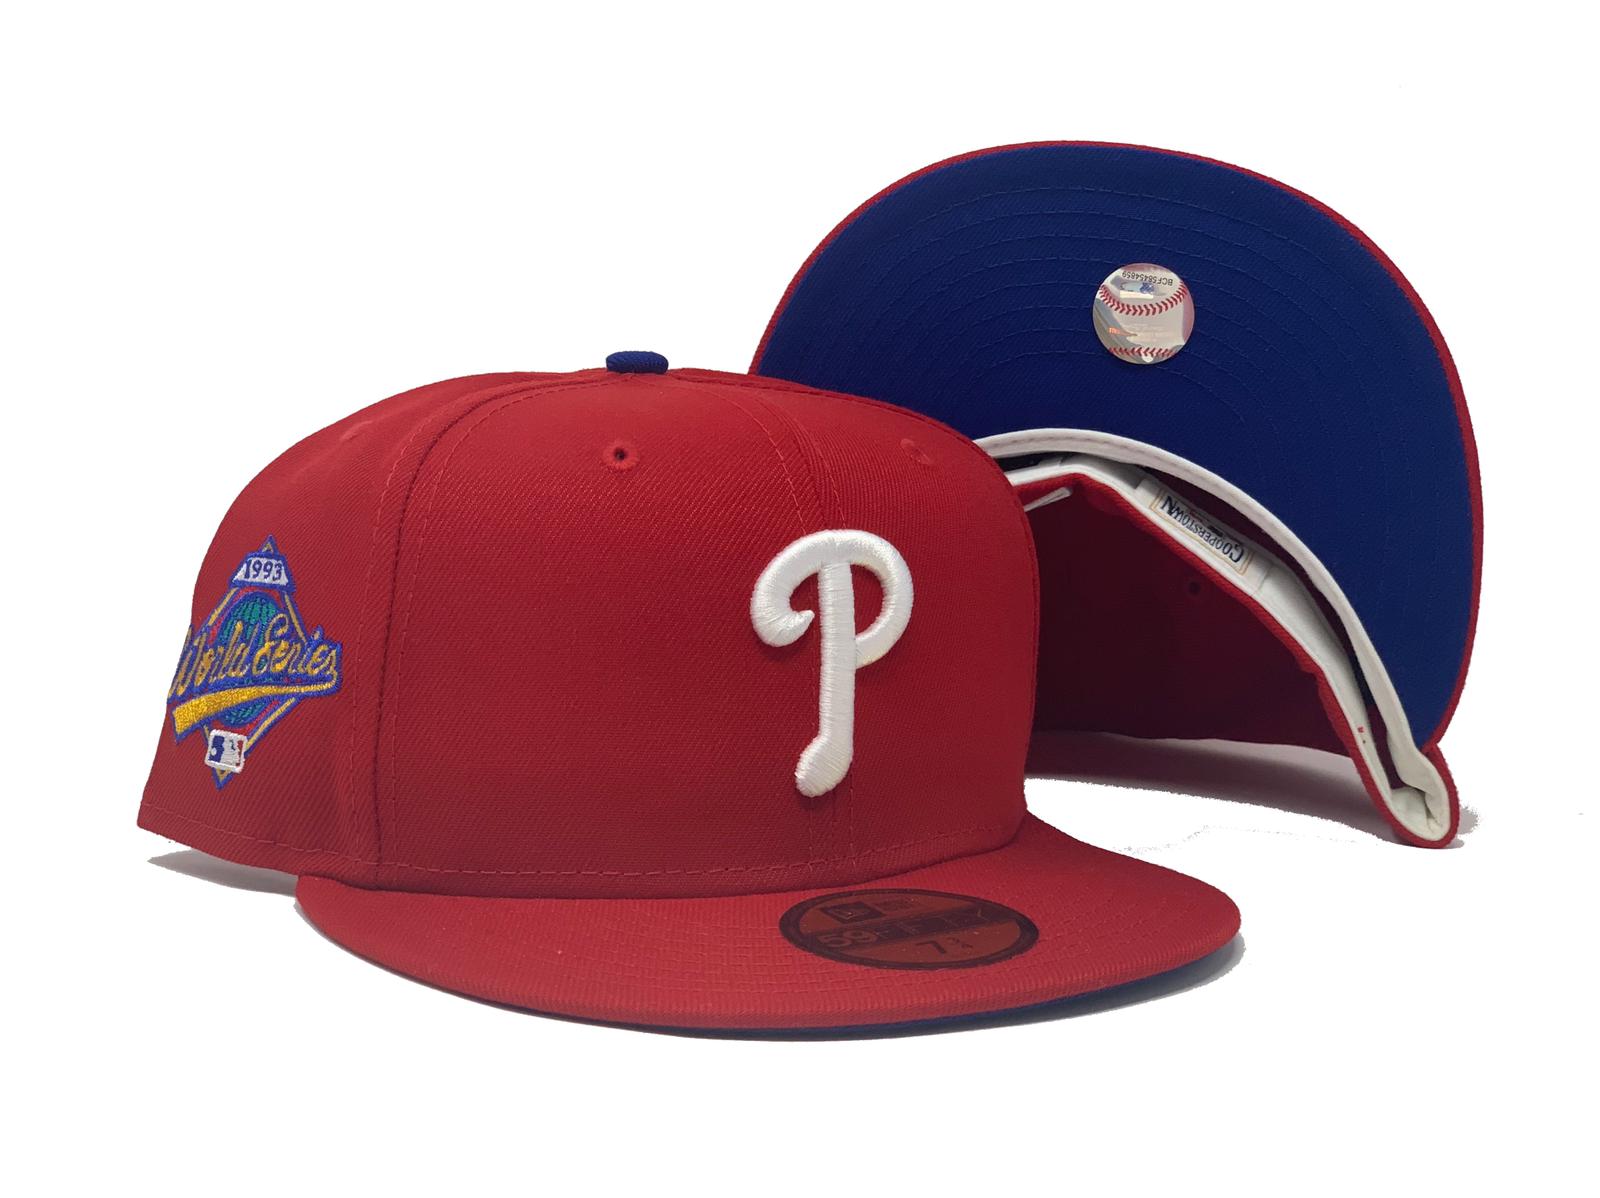 Philadelphia Phillies Red / Blue Diamond Era Performance 59FIFTY Fitted Hat